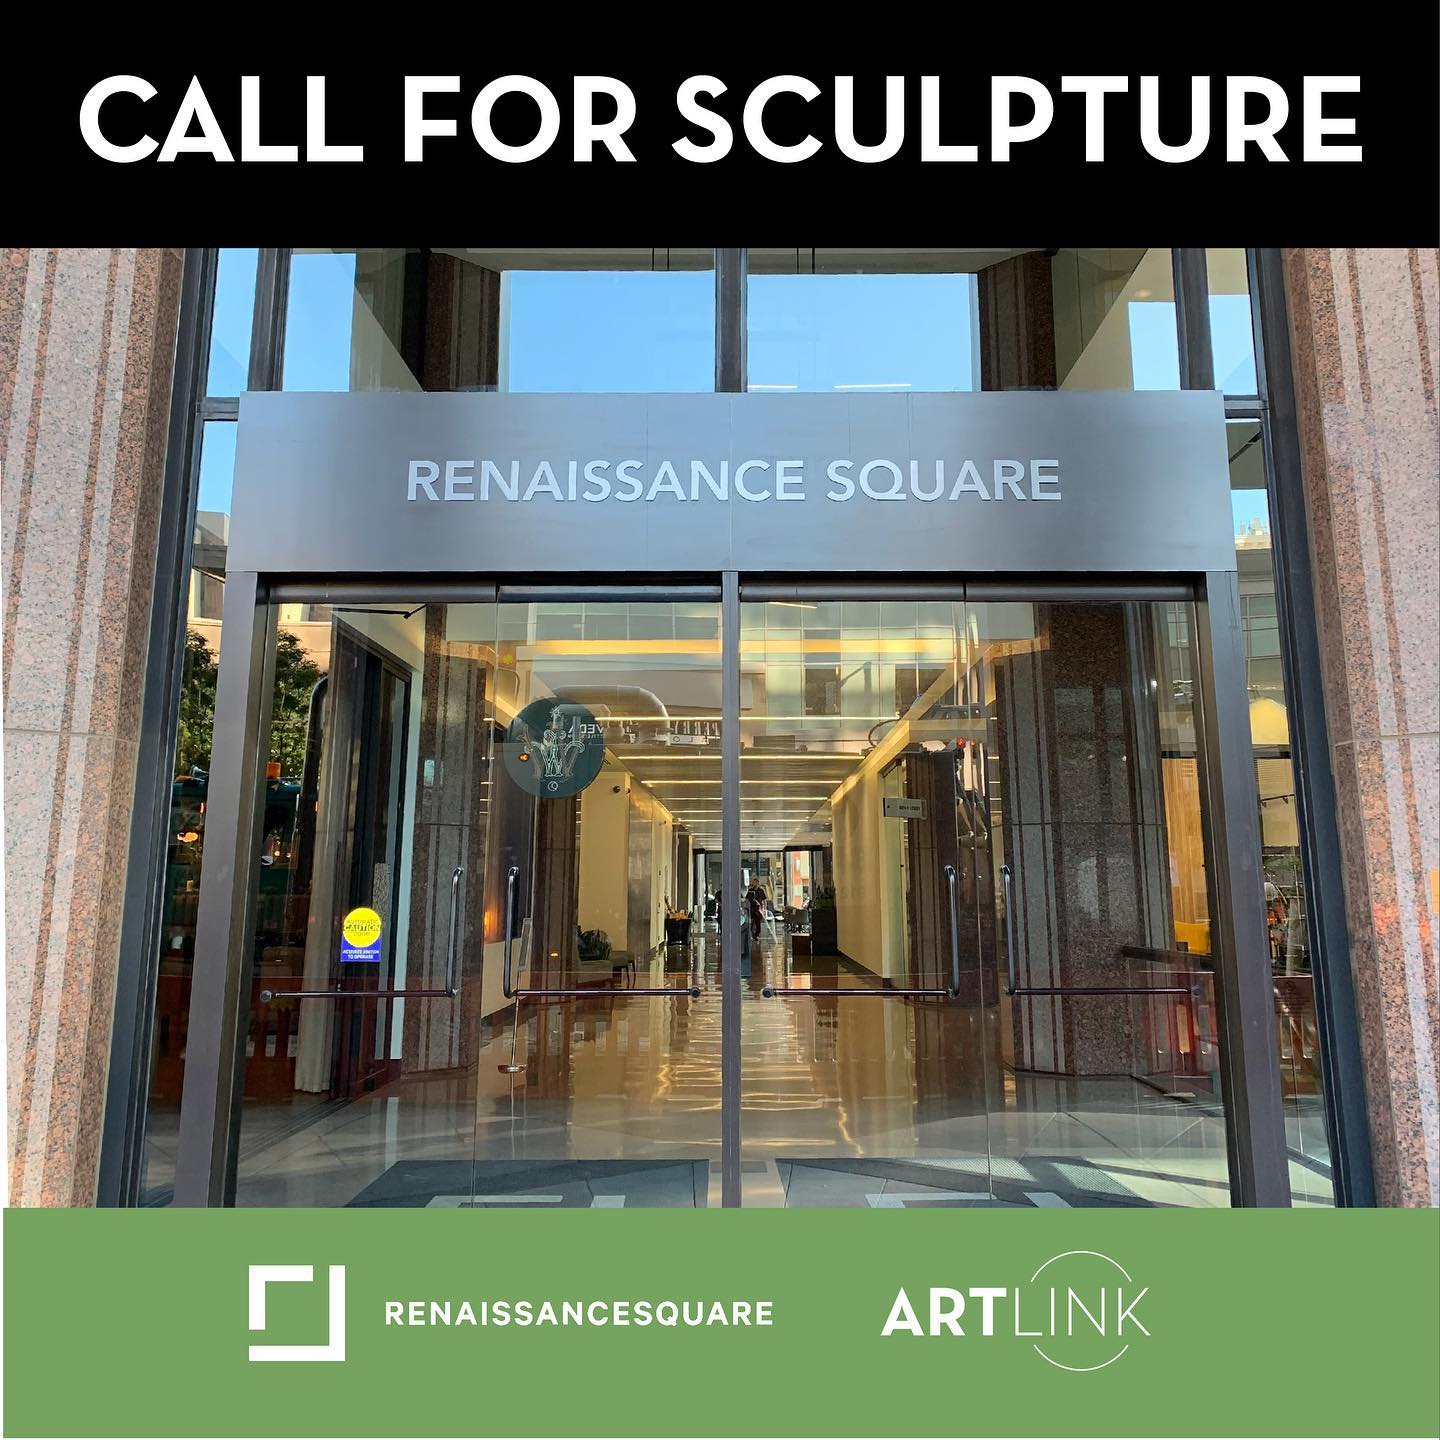 Attention Sculpture Artists - 
DEADLINE APPROACHING for the Renaissance Square call for sculptors. 

December 1, 2022, by 5:00 p.m. (local Arizona time).

This request invites sculptors to submit available works for purchase to Renaissance Square, located in downtown Phoenix.

This call for art is to identify an existing work of exterior sculpture for sale with a high degree of technical skill, personal vision, and a style of work that will enhance the modern look and feel of Renaissance Square. The sculpture will be prominently positioned at the corner entrance of Renaissance Square, on the northwest corner of Washington St. and Central Ave., adjacent to a future light rail station.

This opportunity is open to sculptors living and working in the state of Arizona with the ability to produce exemplary art.  Artists must be registered as an Artlink Articipant. Please find the registration form on www.artlinkphx.org and submit today! 

#artlinkphx #artistsaz #artcommunityphx